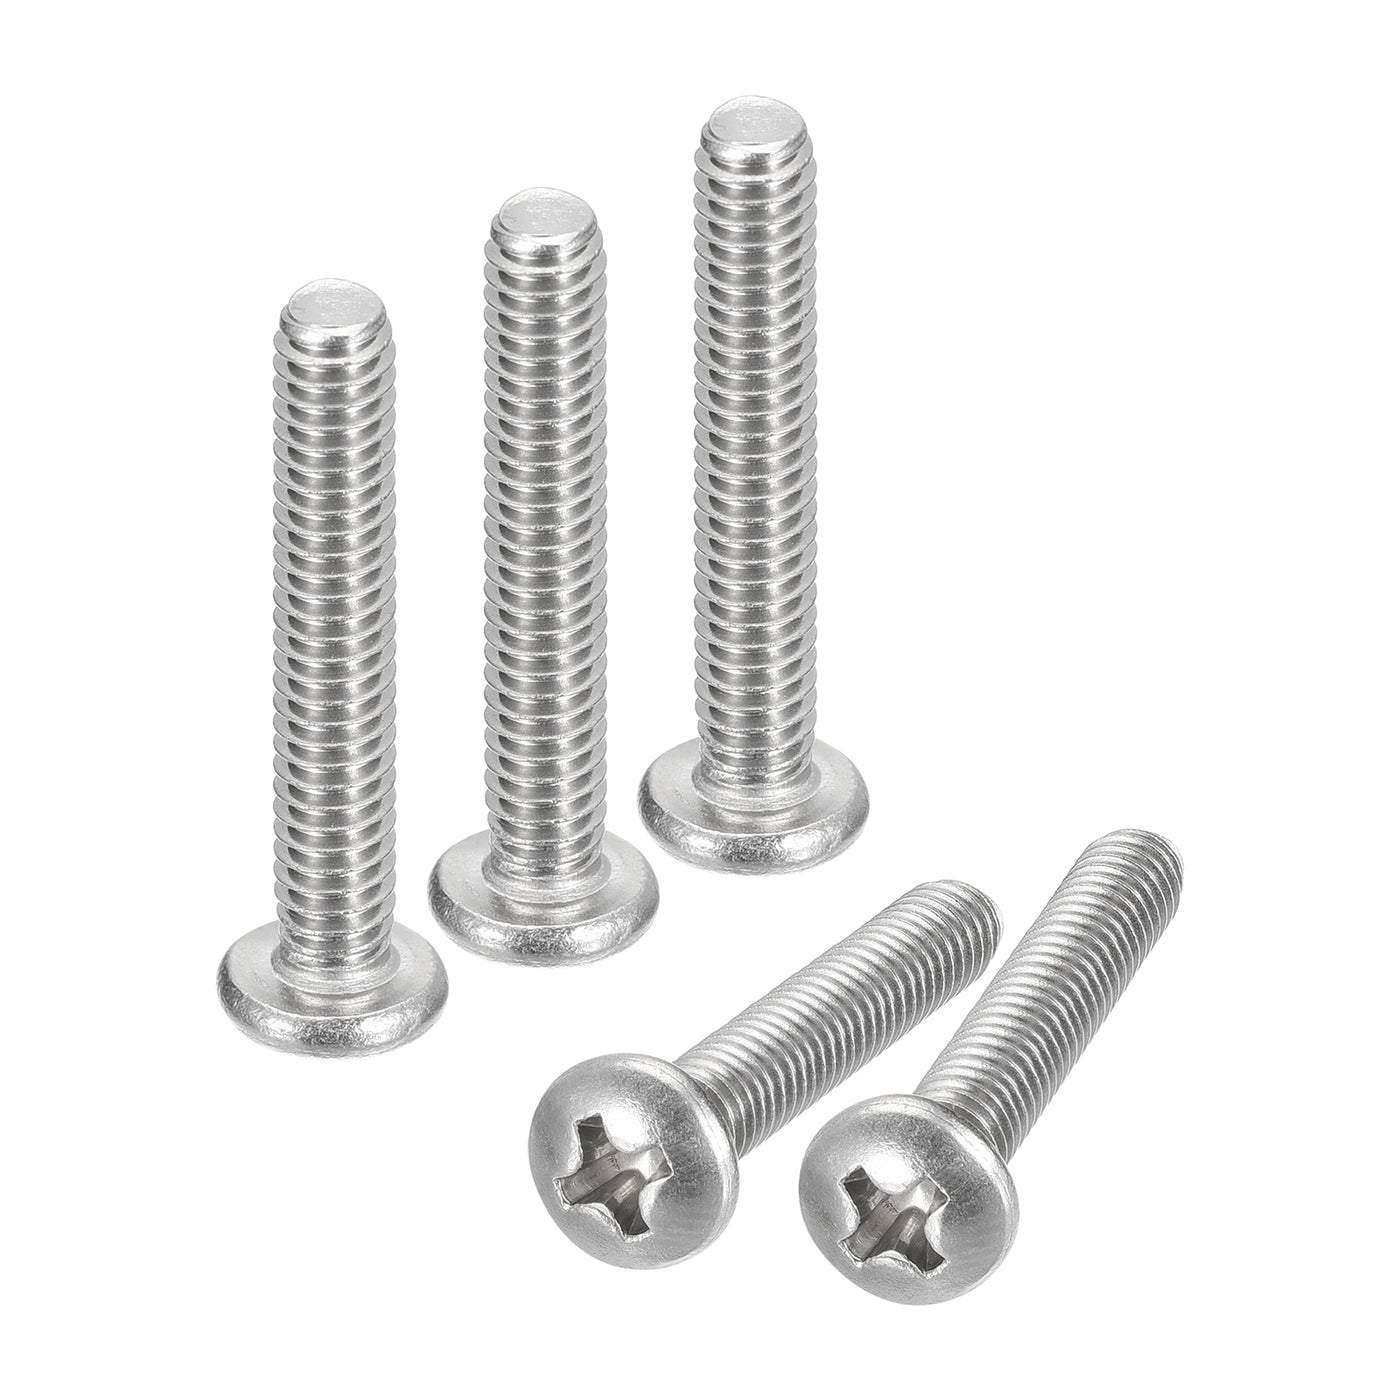 uxcell Uxcell #8-32x1" Pan Head Machine Screws, Stainless Steel 18-8 Screw, Pack of 20